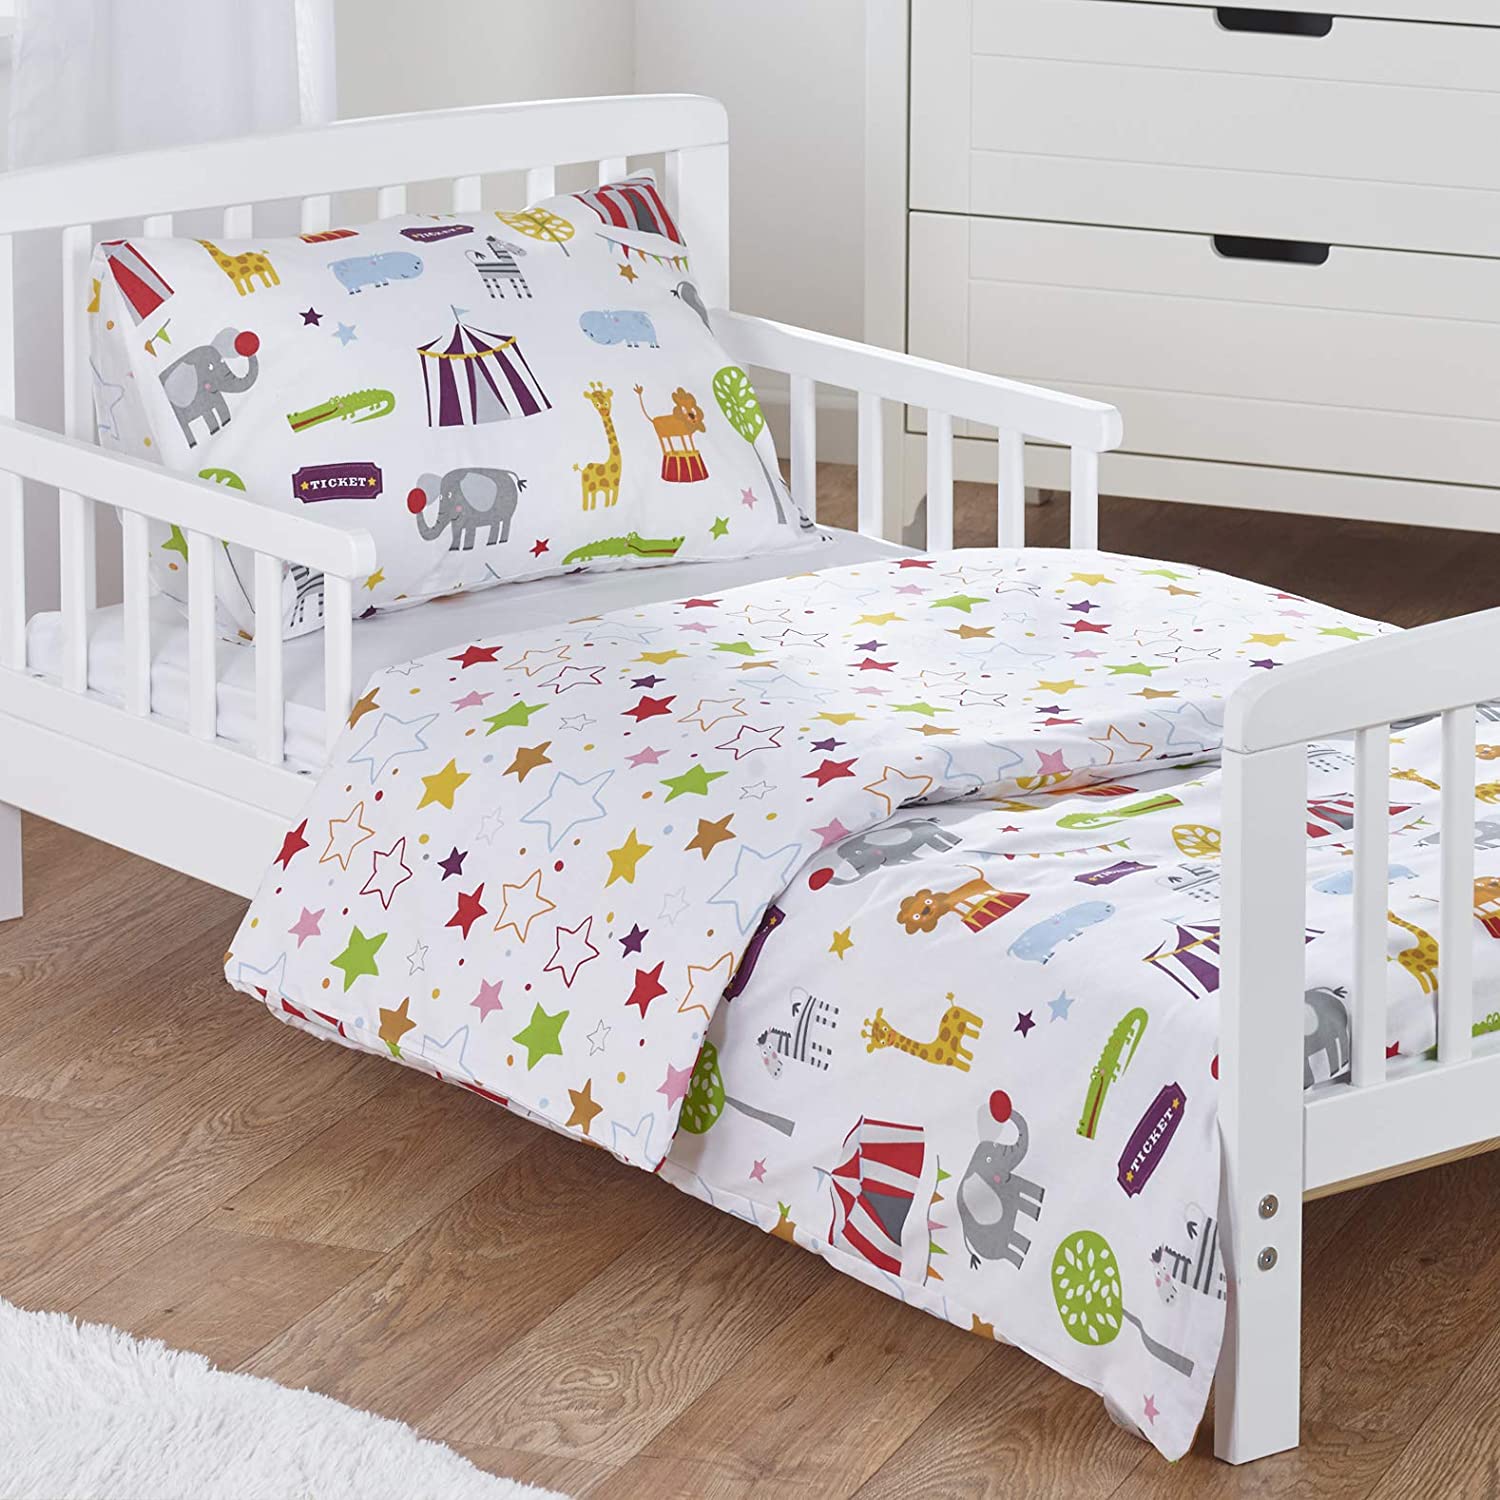 Kinder Valley 3Pc Toddler Bedding Set - Circus Friends